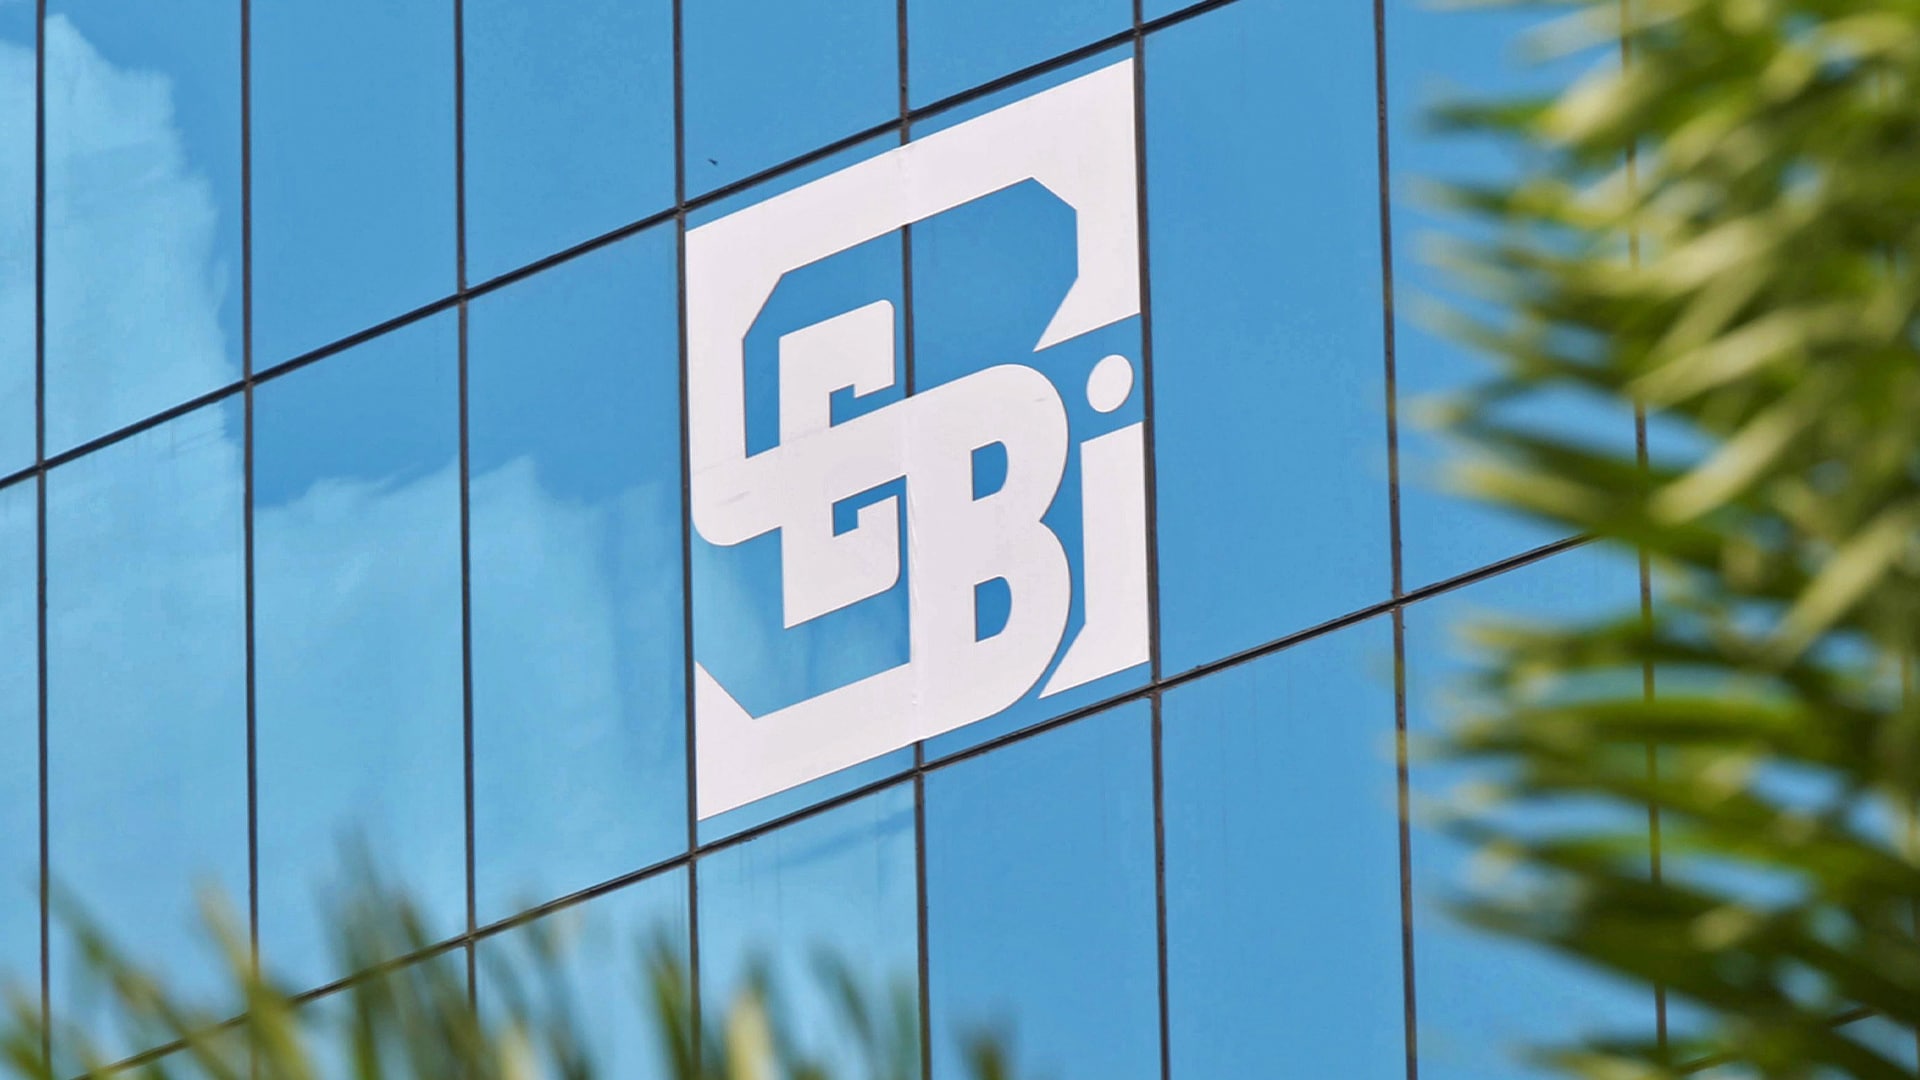 Sebi extends deadline for comments on proposed cyber resilience framework